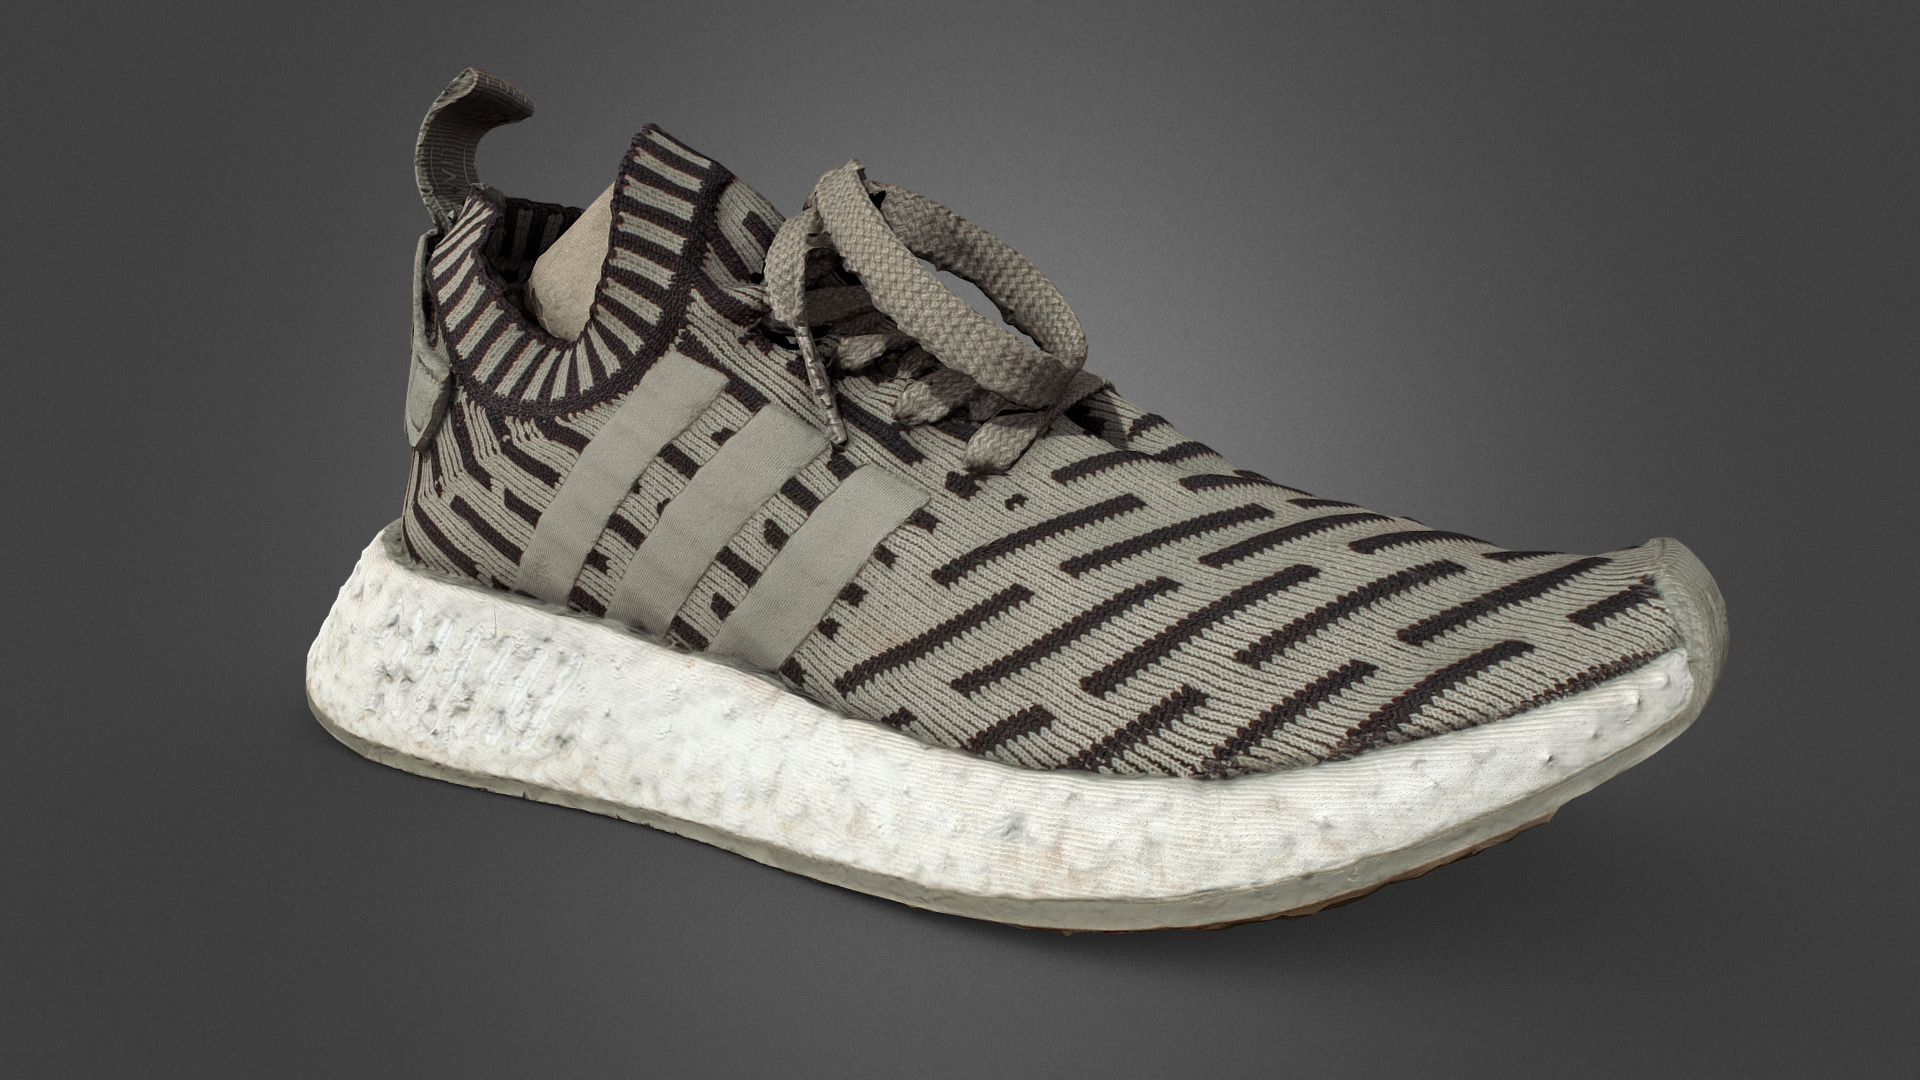 3D model Adidas NMD - This is a 3D model of the Adidas NMD. The 3D model is about a black and white shoe.